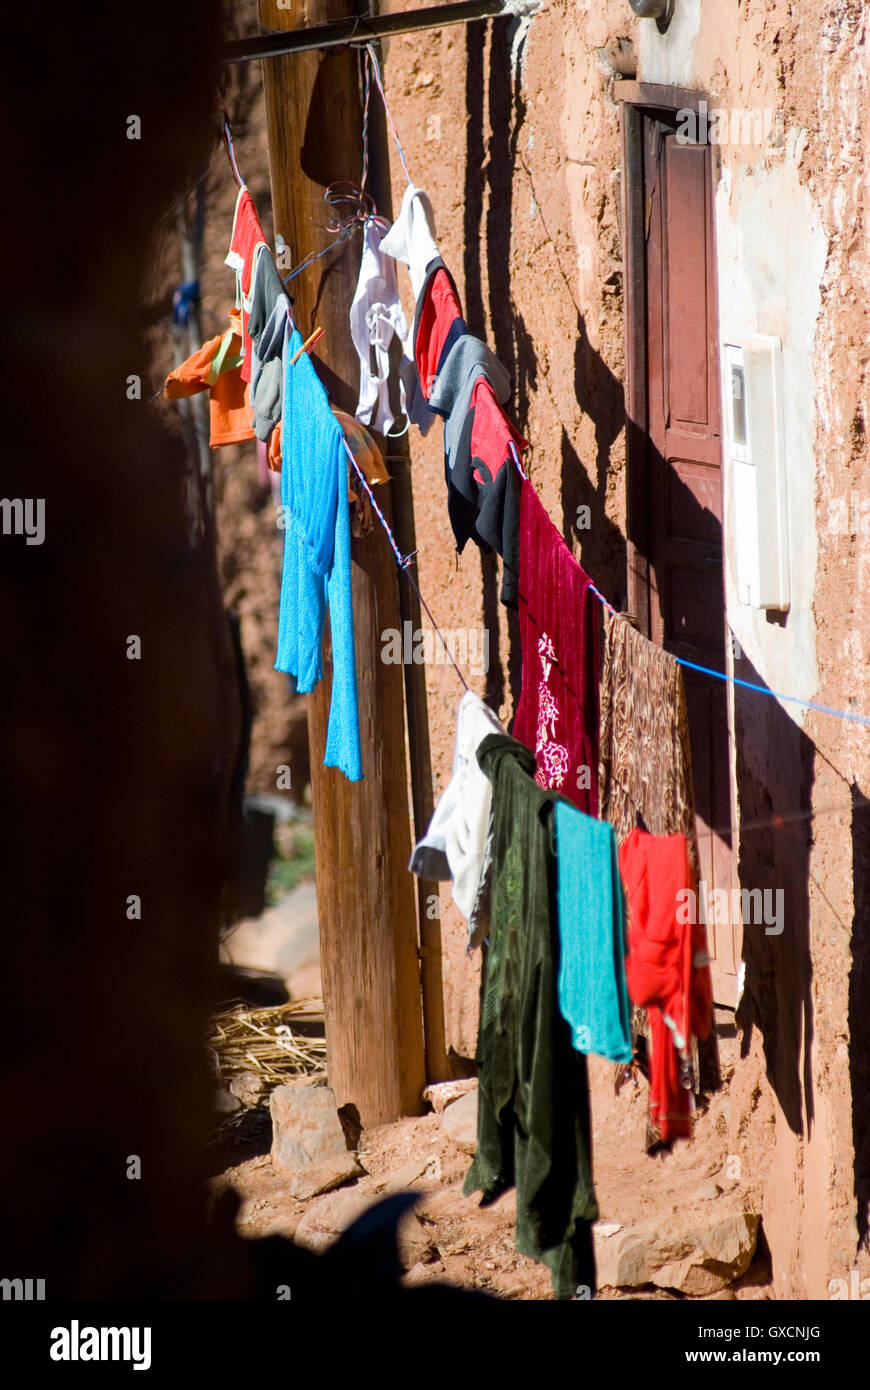 Clothes on a washing line in a third world country Stock Photo